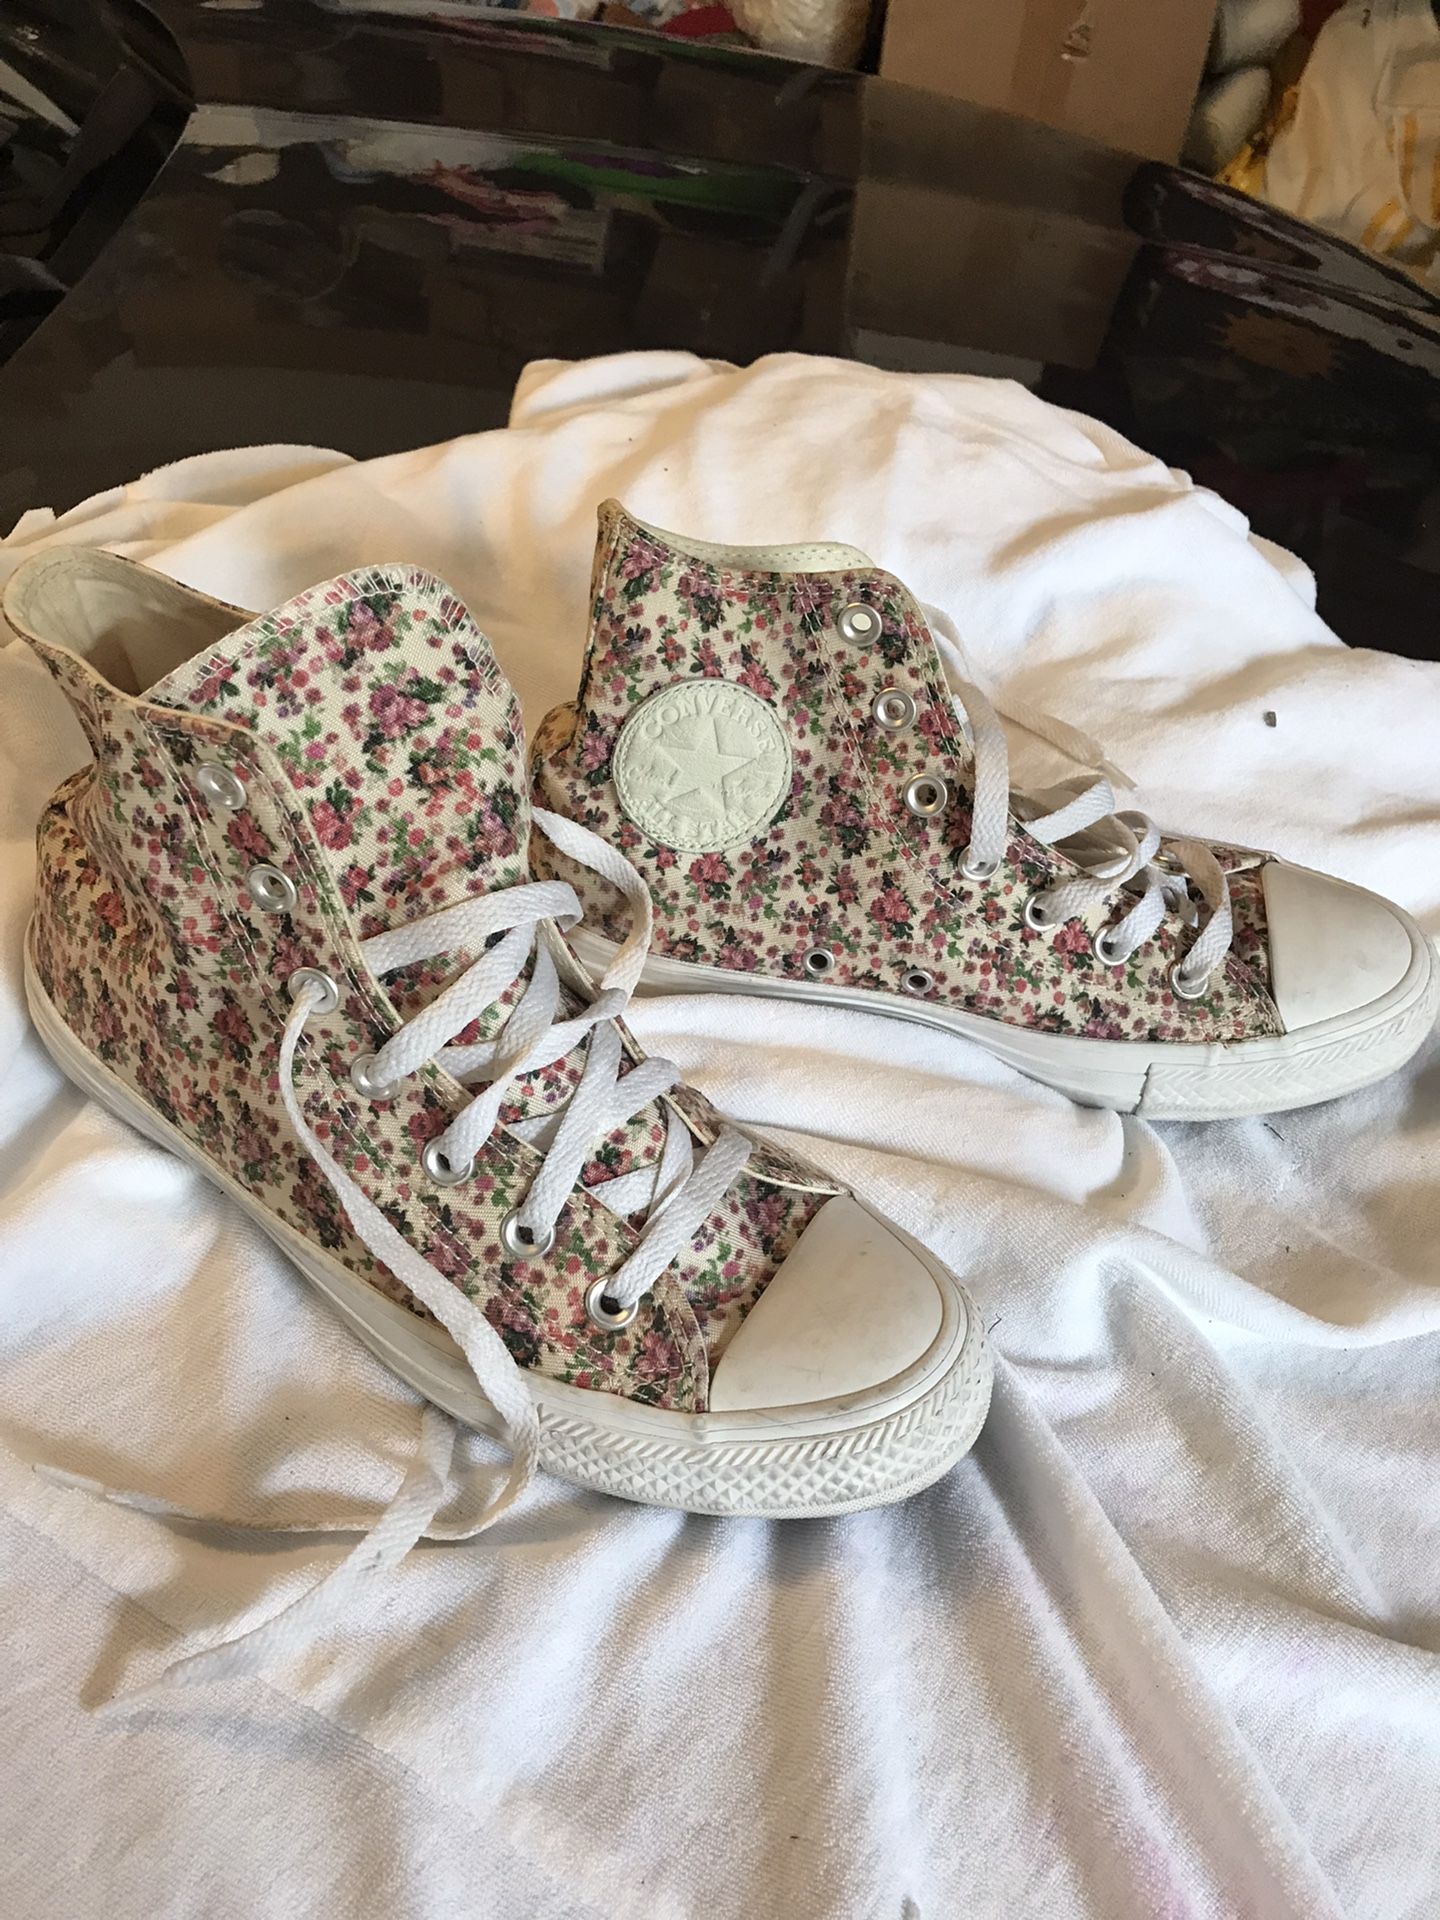 Great condition size 7 Converse $15